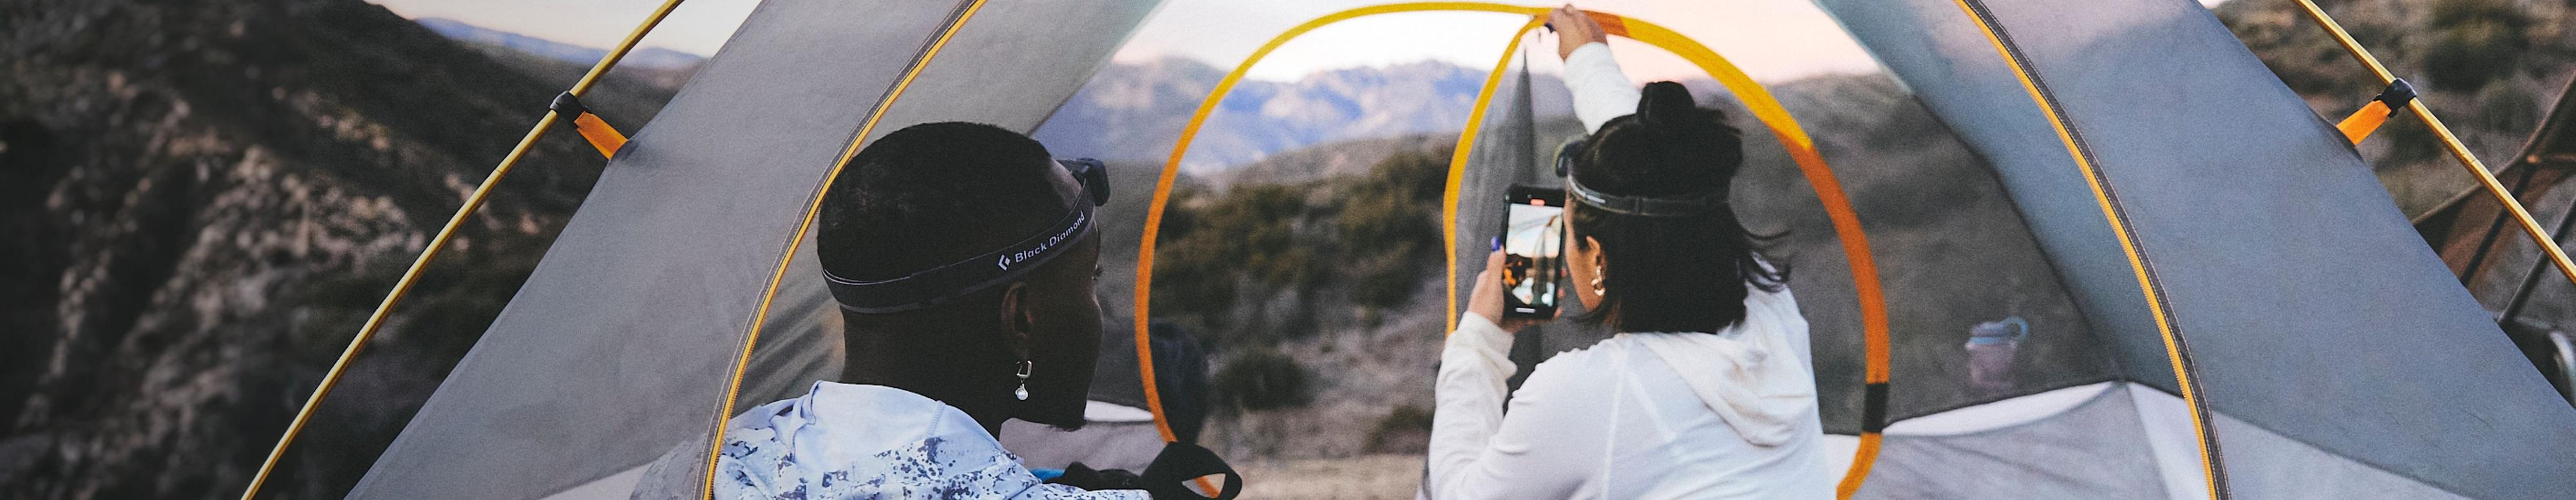 Two people are in a tent from The North Face with the rain fly off. One person is taking a photo of the mountainous view with their phone. Text reads: “All the space you need—for all the views you want.” 